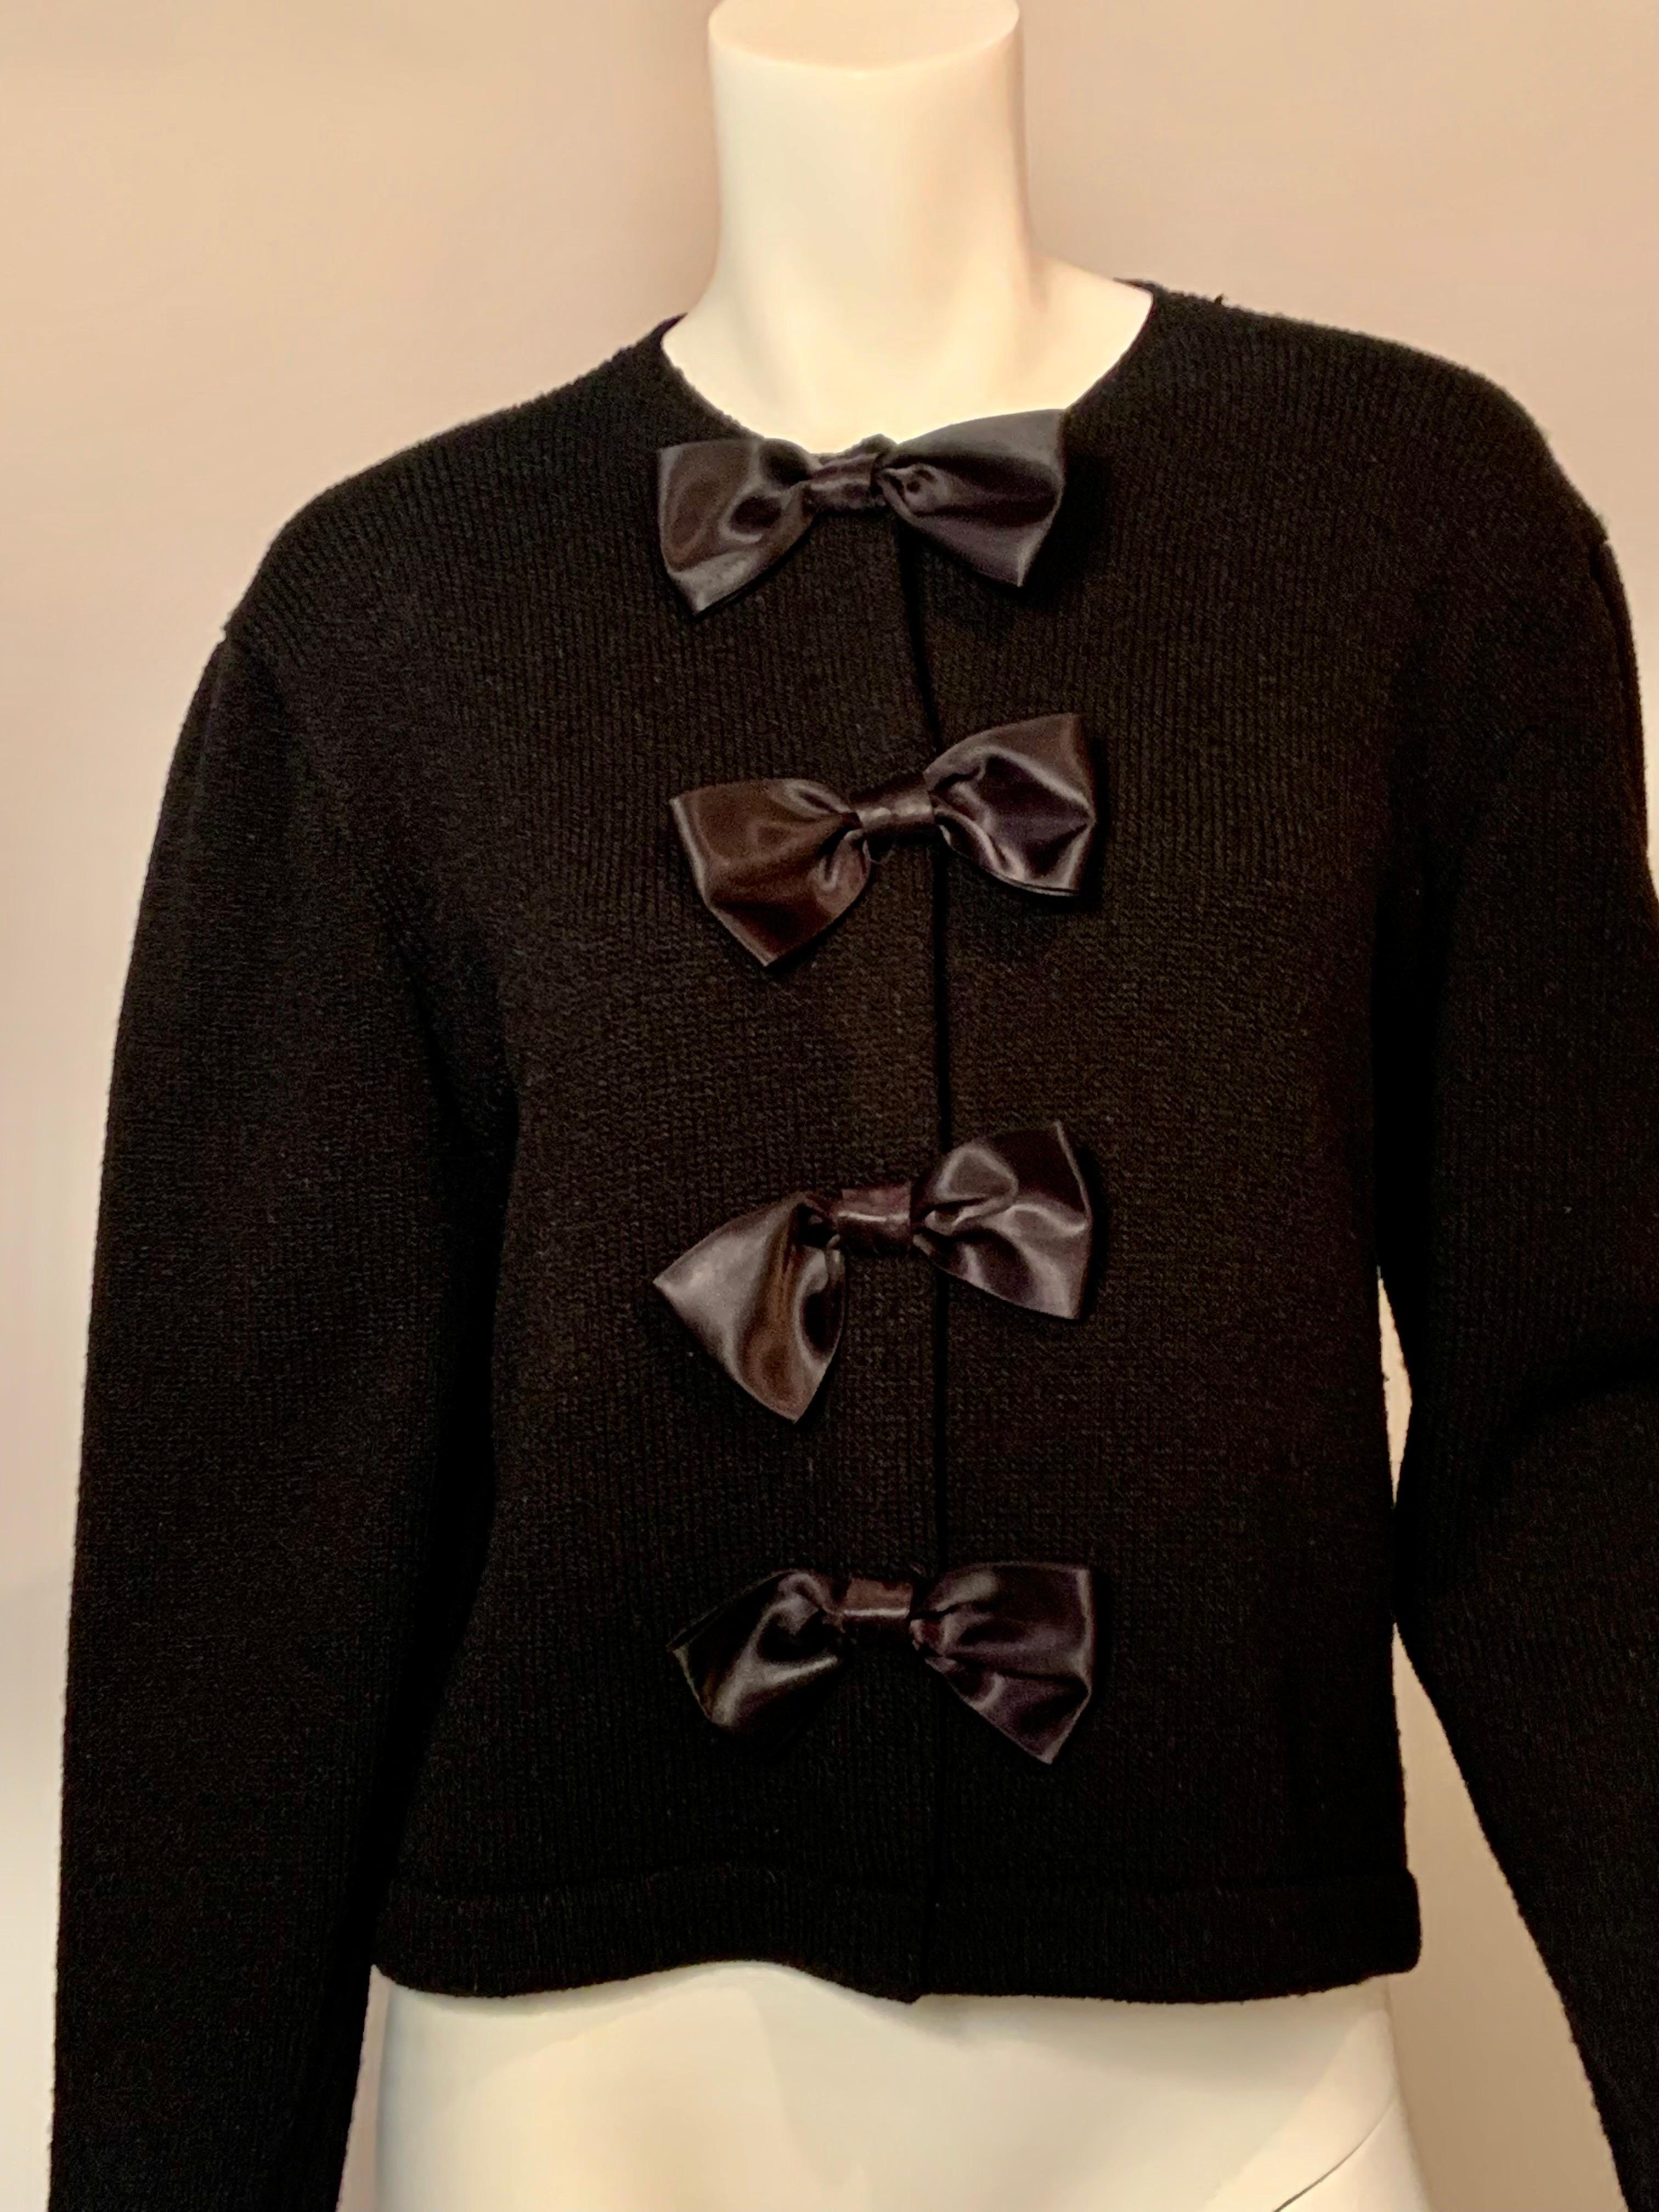 This 1950’s sweater by Corinne O’Hare is elevated by the black satin bows placed over the
snaps at the center front. It is in excellent condition and marked a vintage size 18.
Measurements; Shoulders 18” Bust 42” Waist 38”. Sleeves 23”. Length. 26”